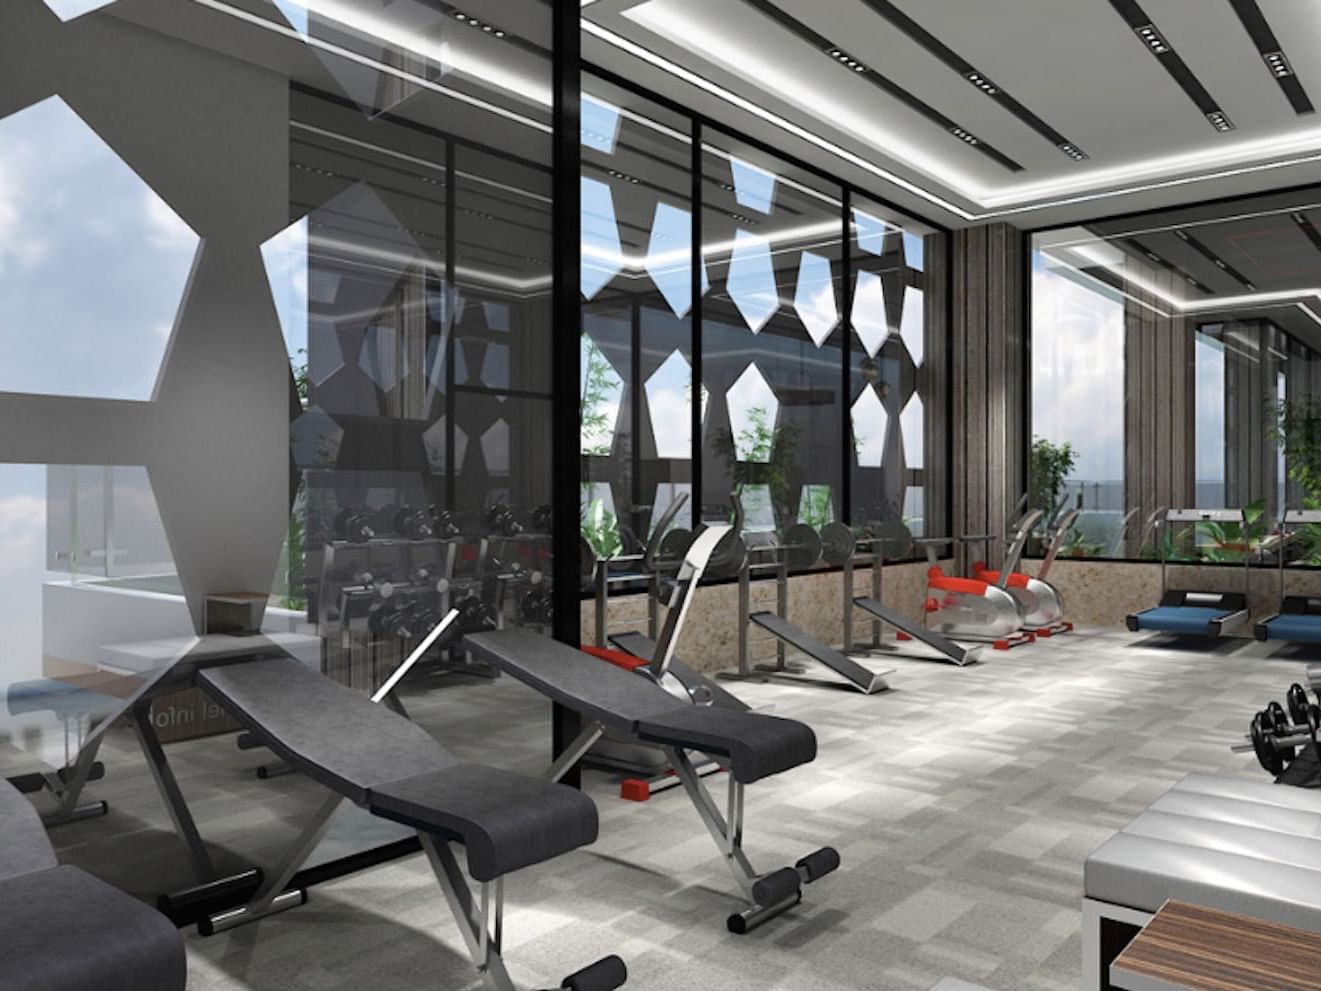 Hotel gym with adjustable gym workout bench at Easton Hotels